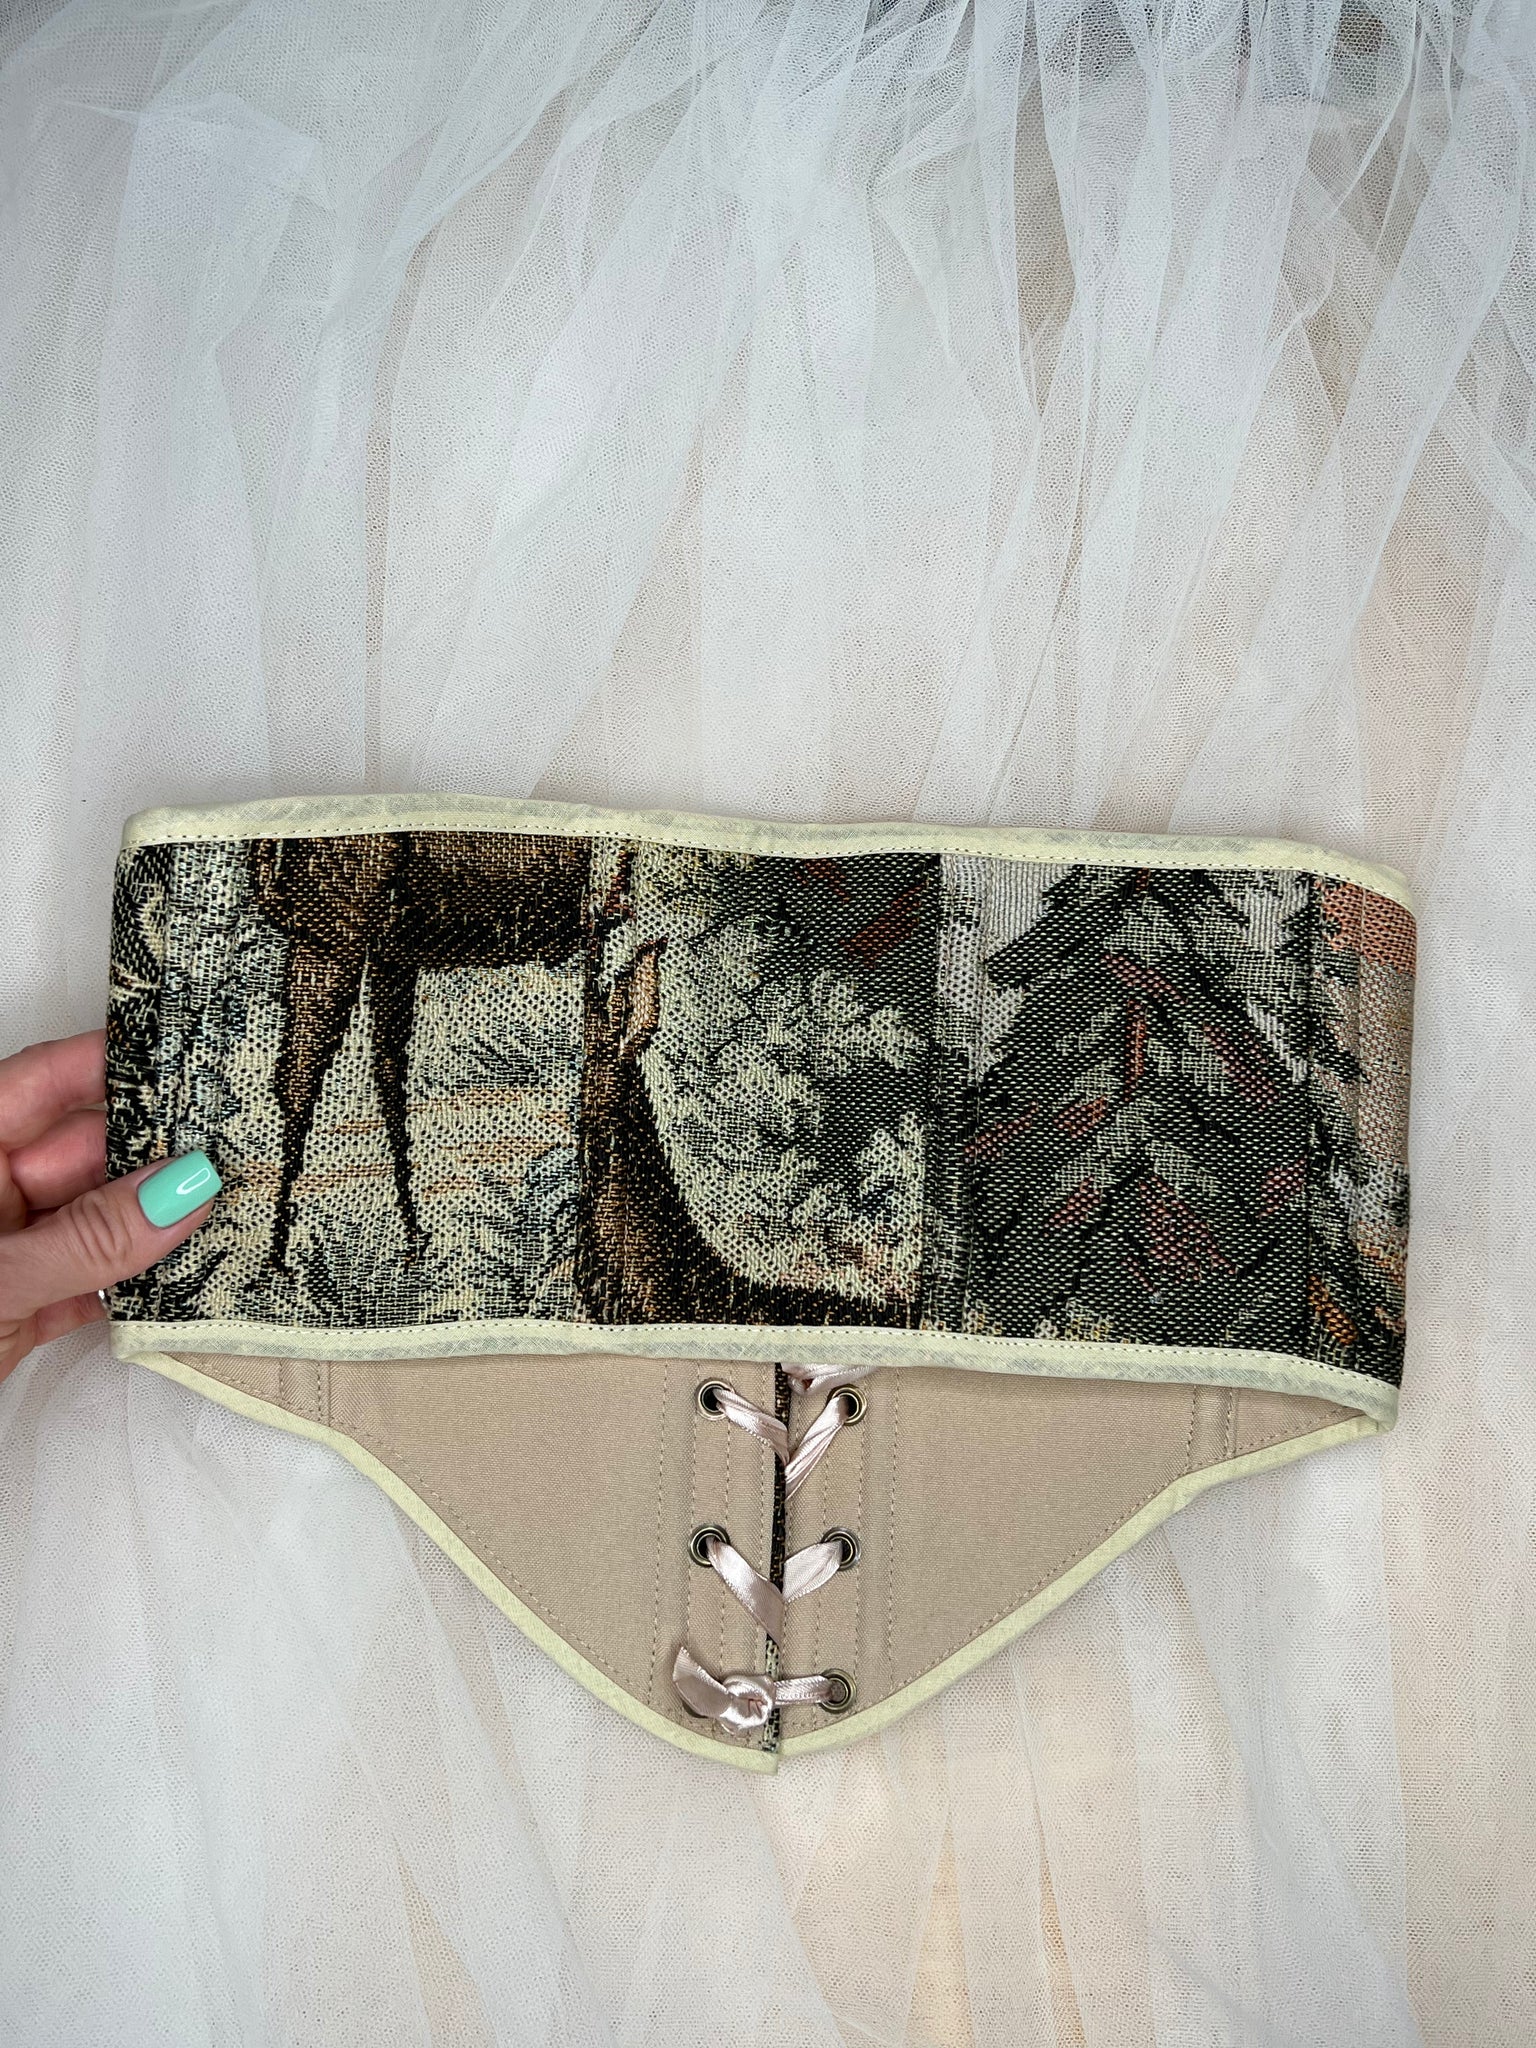 NEW Vintage Tapestry Lace-up Corset Belt, “Deer in the Woods” pattern, Size XS-S (US 00-2)